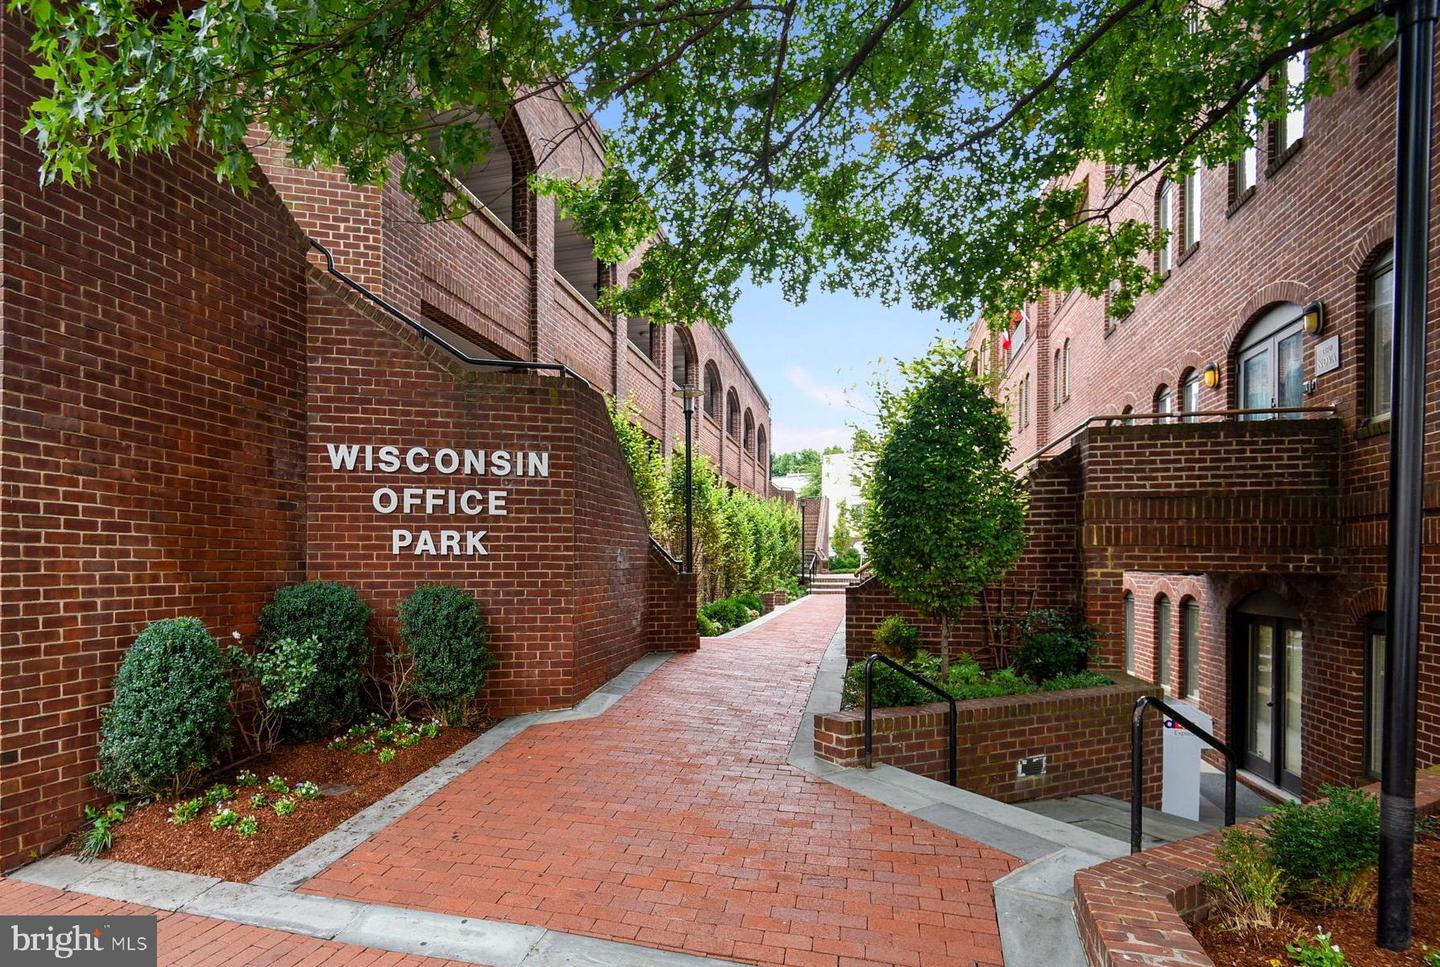 2154 Wisconsin Avenue NW UNIT 7, Washington, DC 20007 | MLS DCDC2028624 |  Listing Information | Homes for Sale and Rent